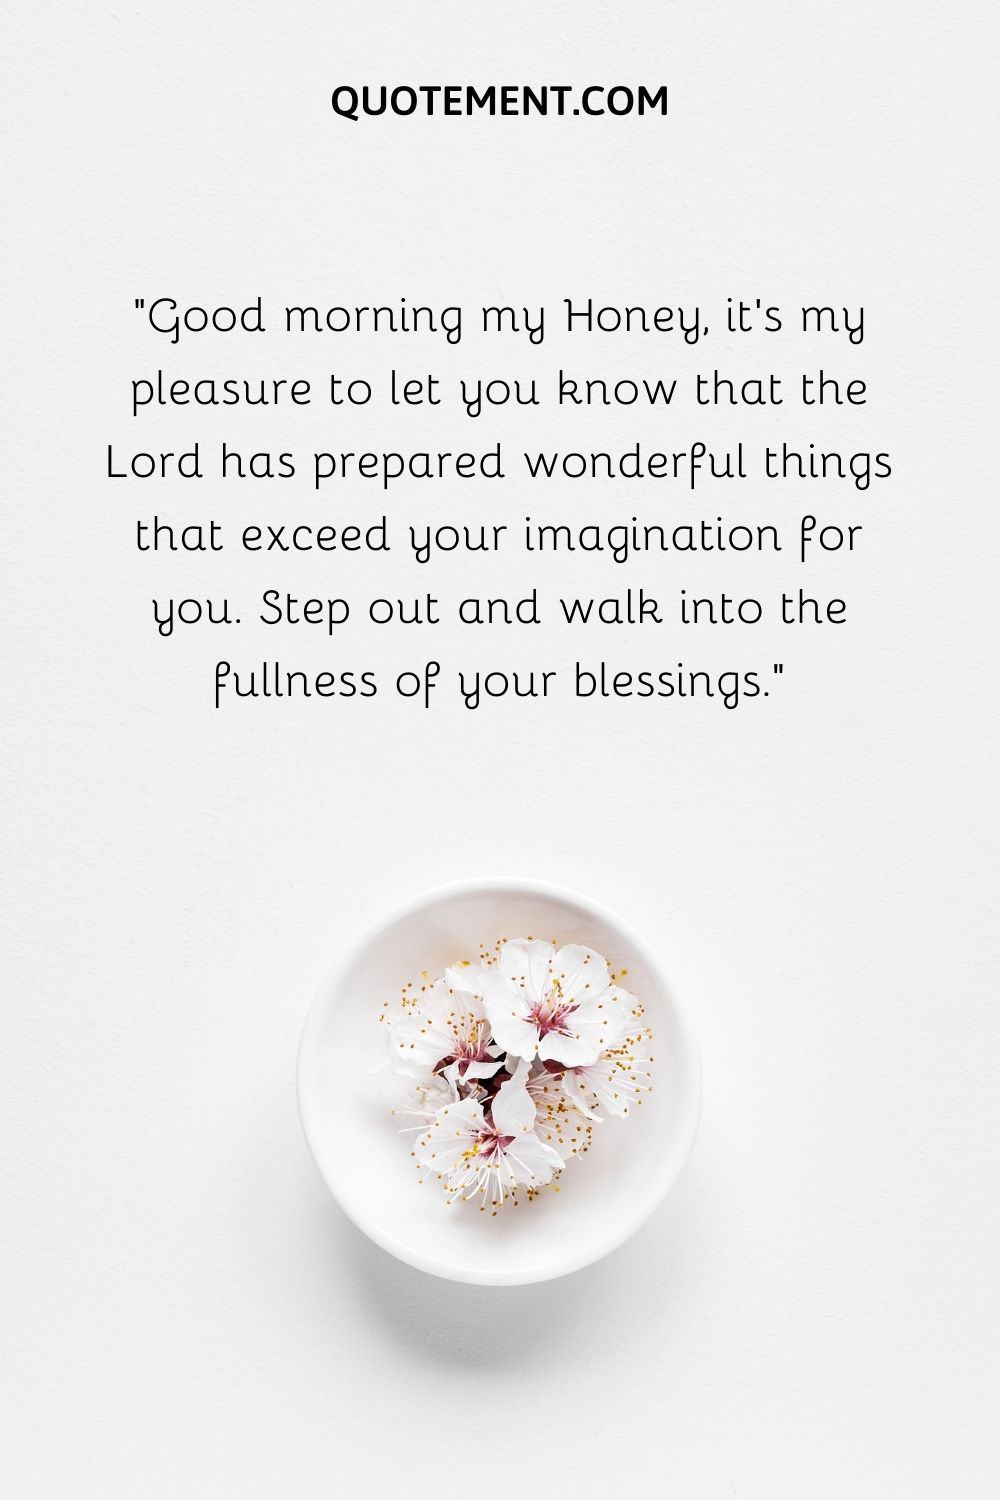 Step out and walk into the fullness of your blessings